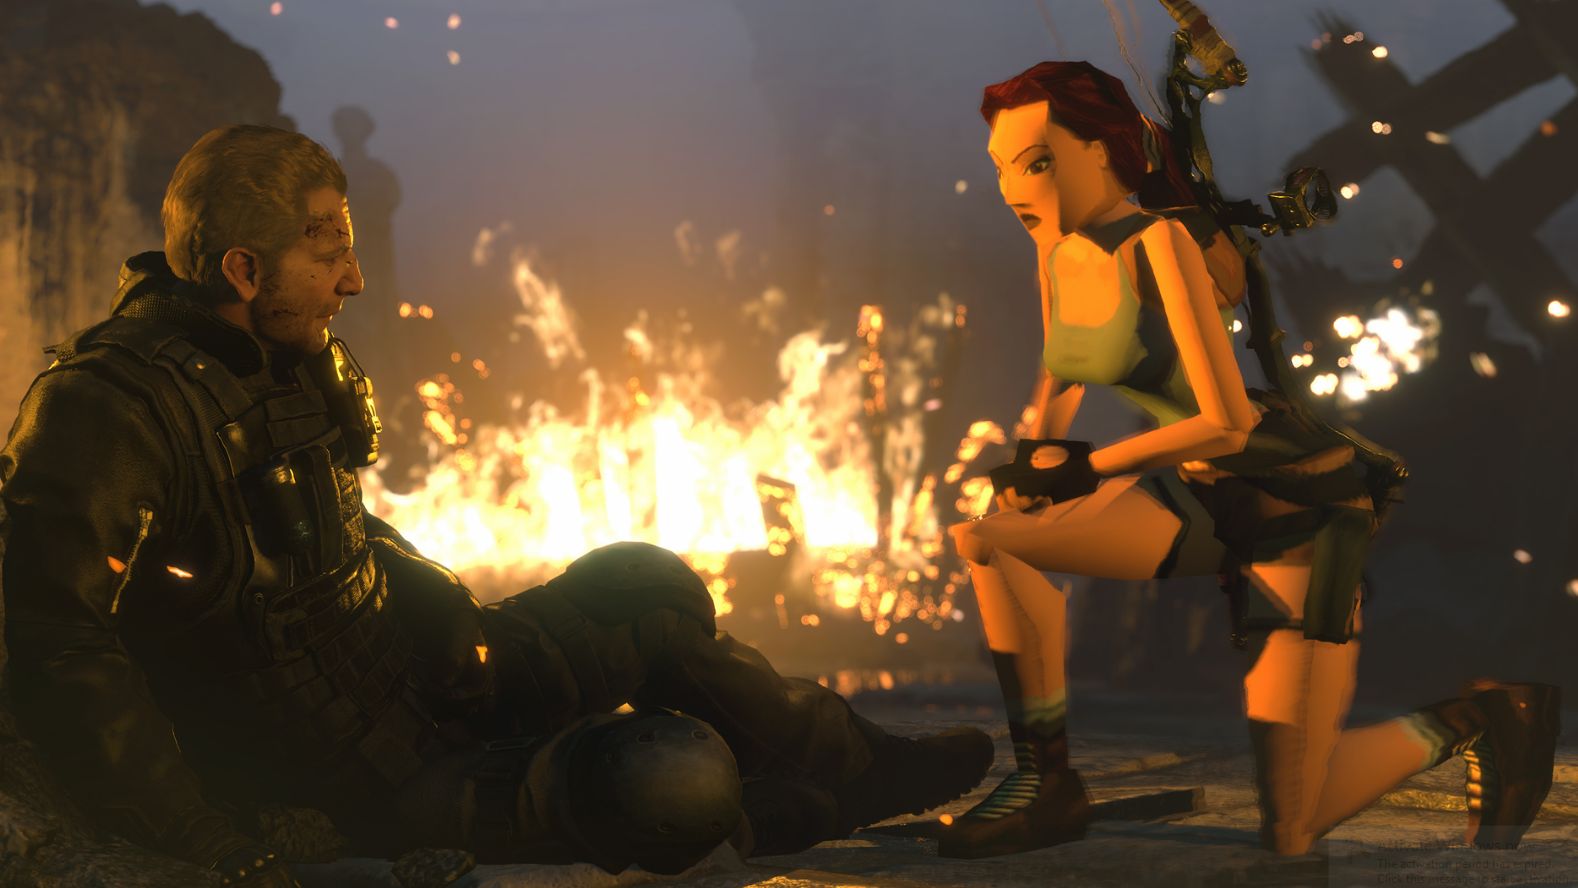 Here's your first look at Netflix's Tomb Raider animated series